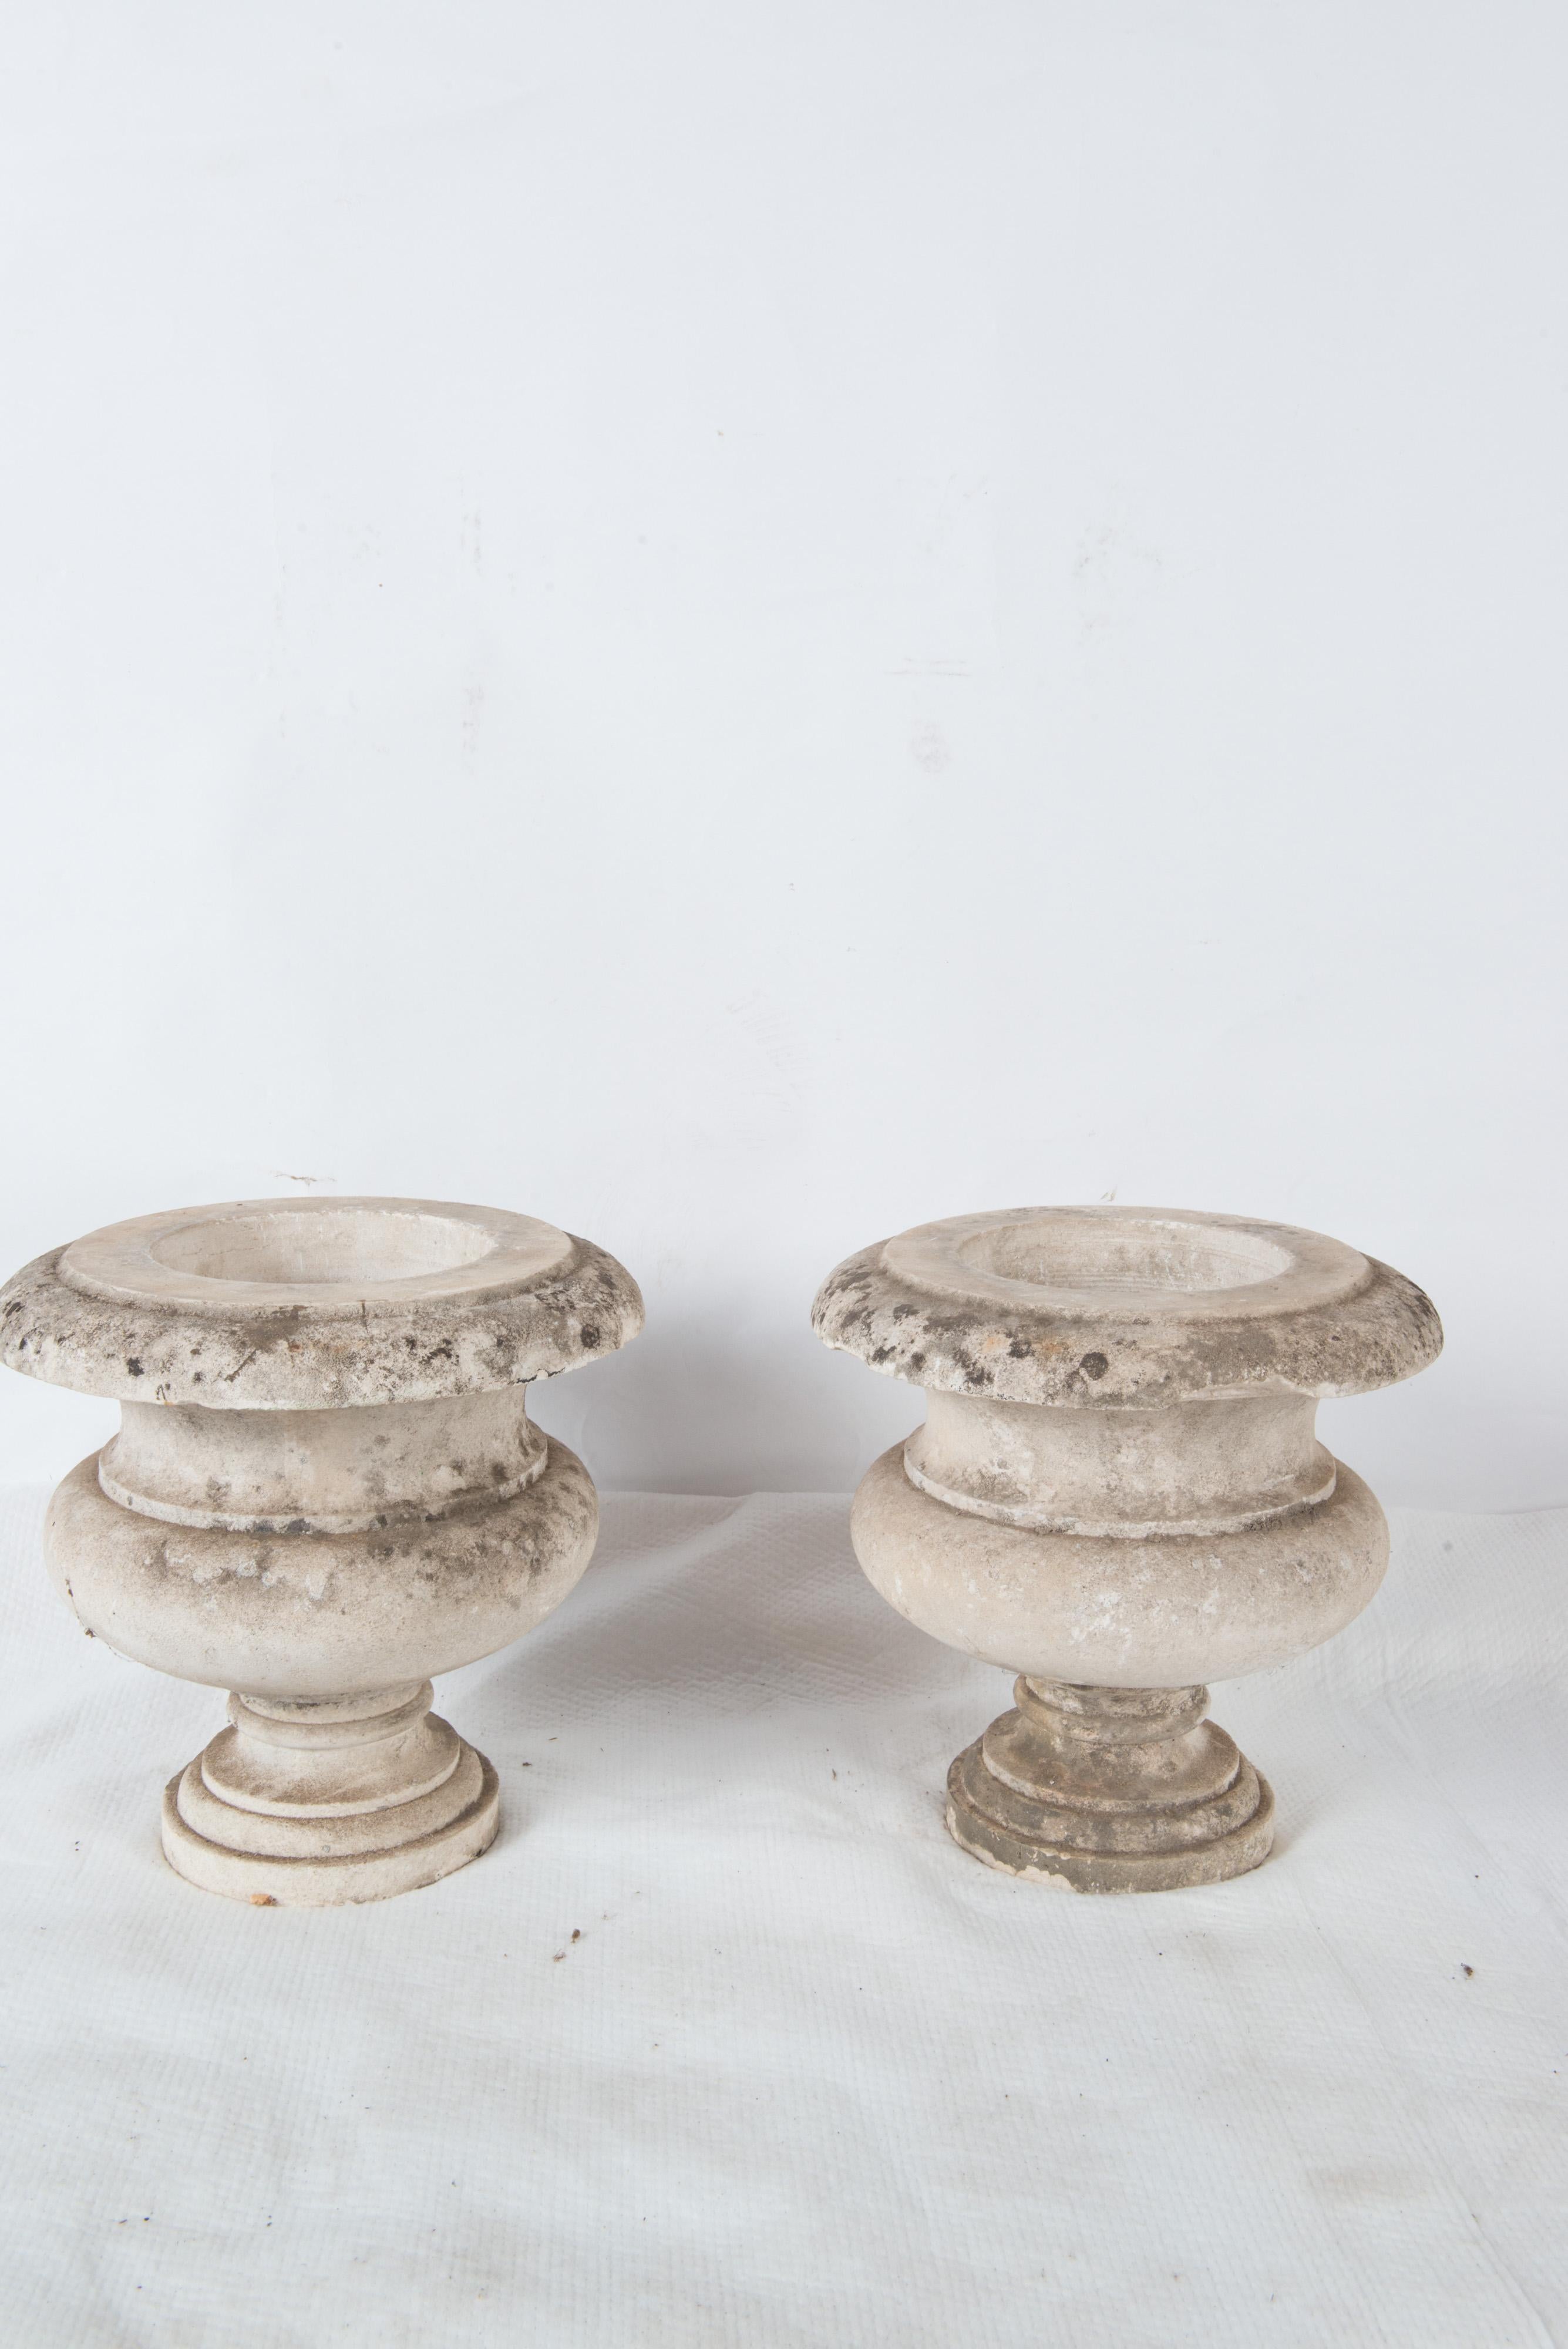 Pair of 19th century French carved stone planters or urns with circular bases. These are not cast stone.
Some losses to rims.